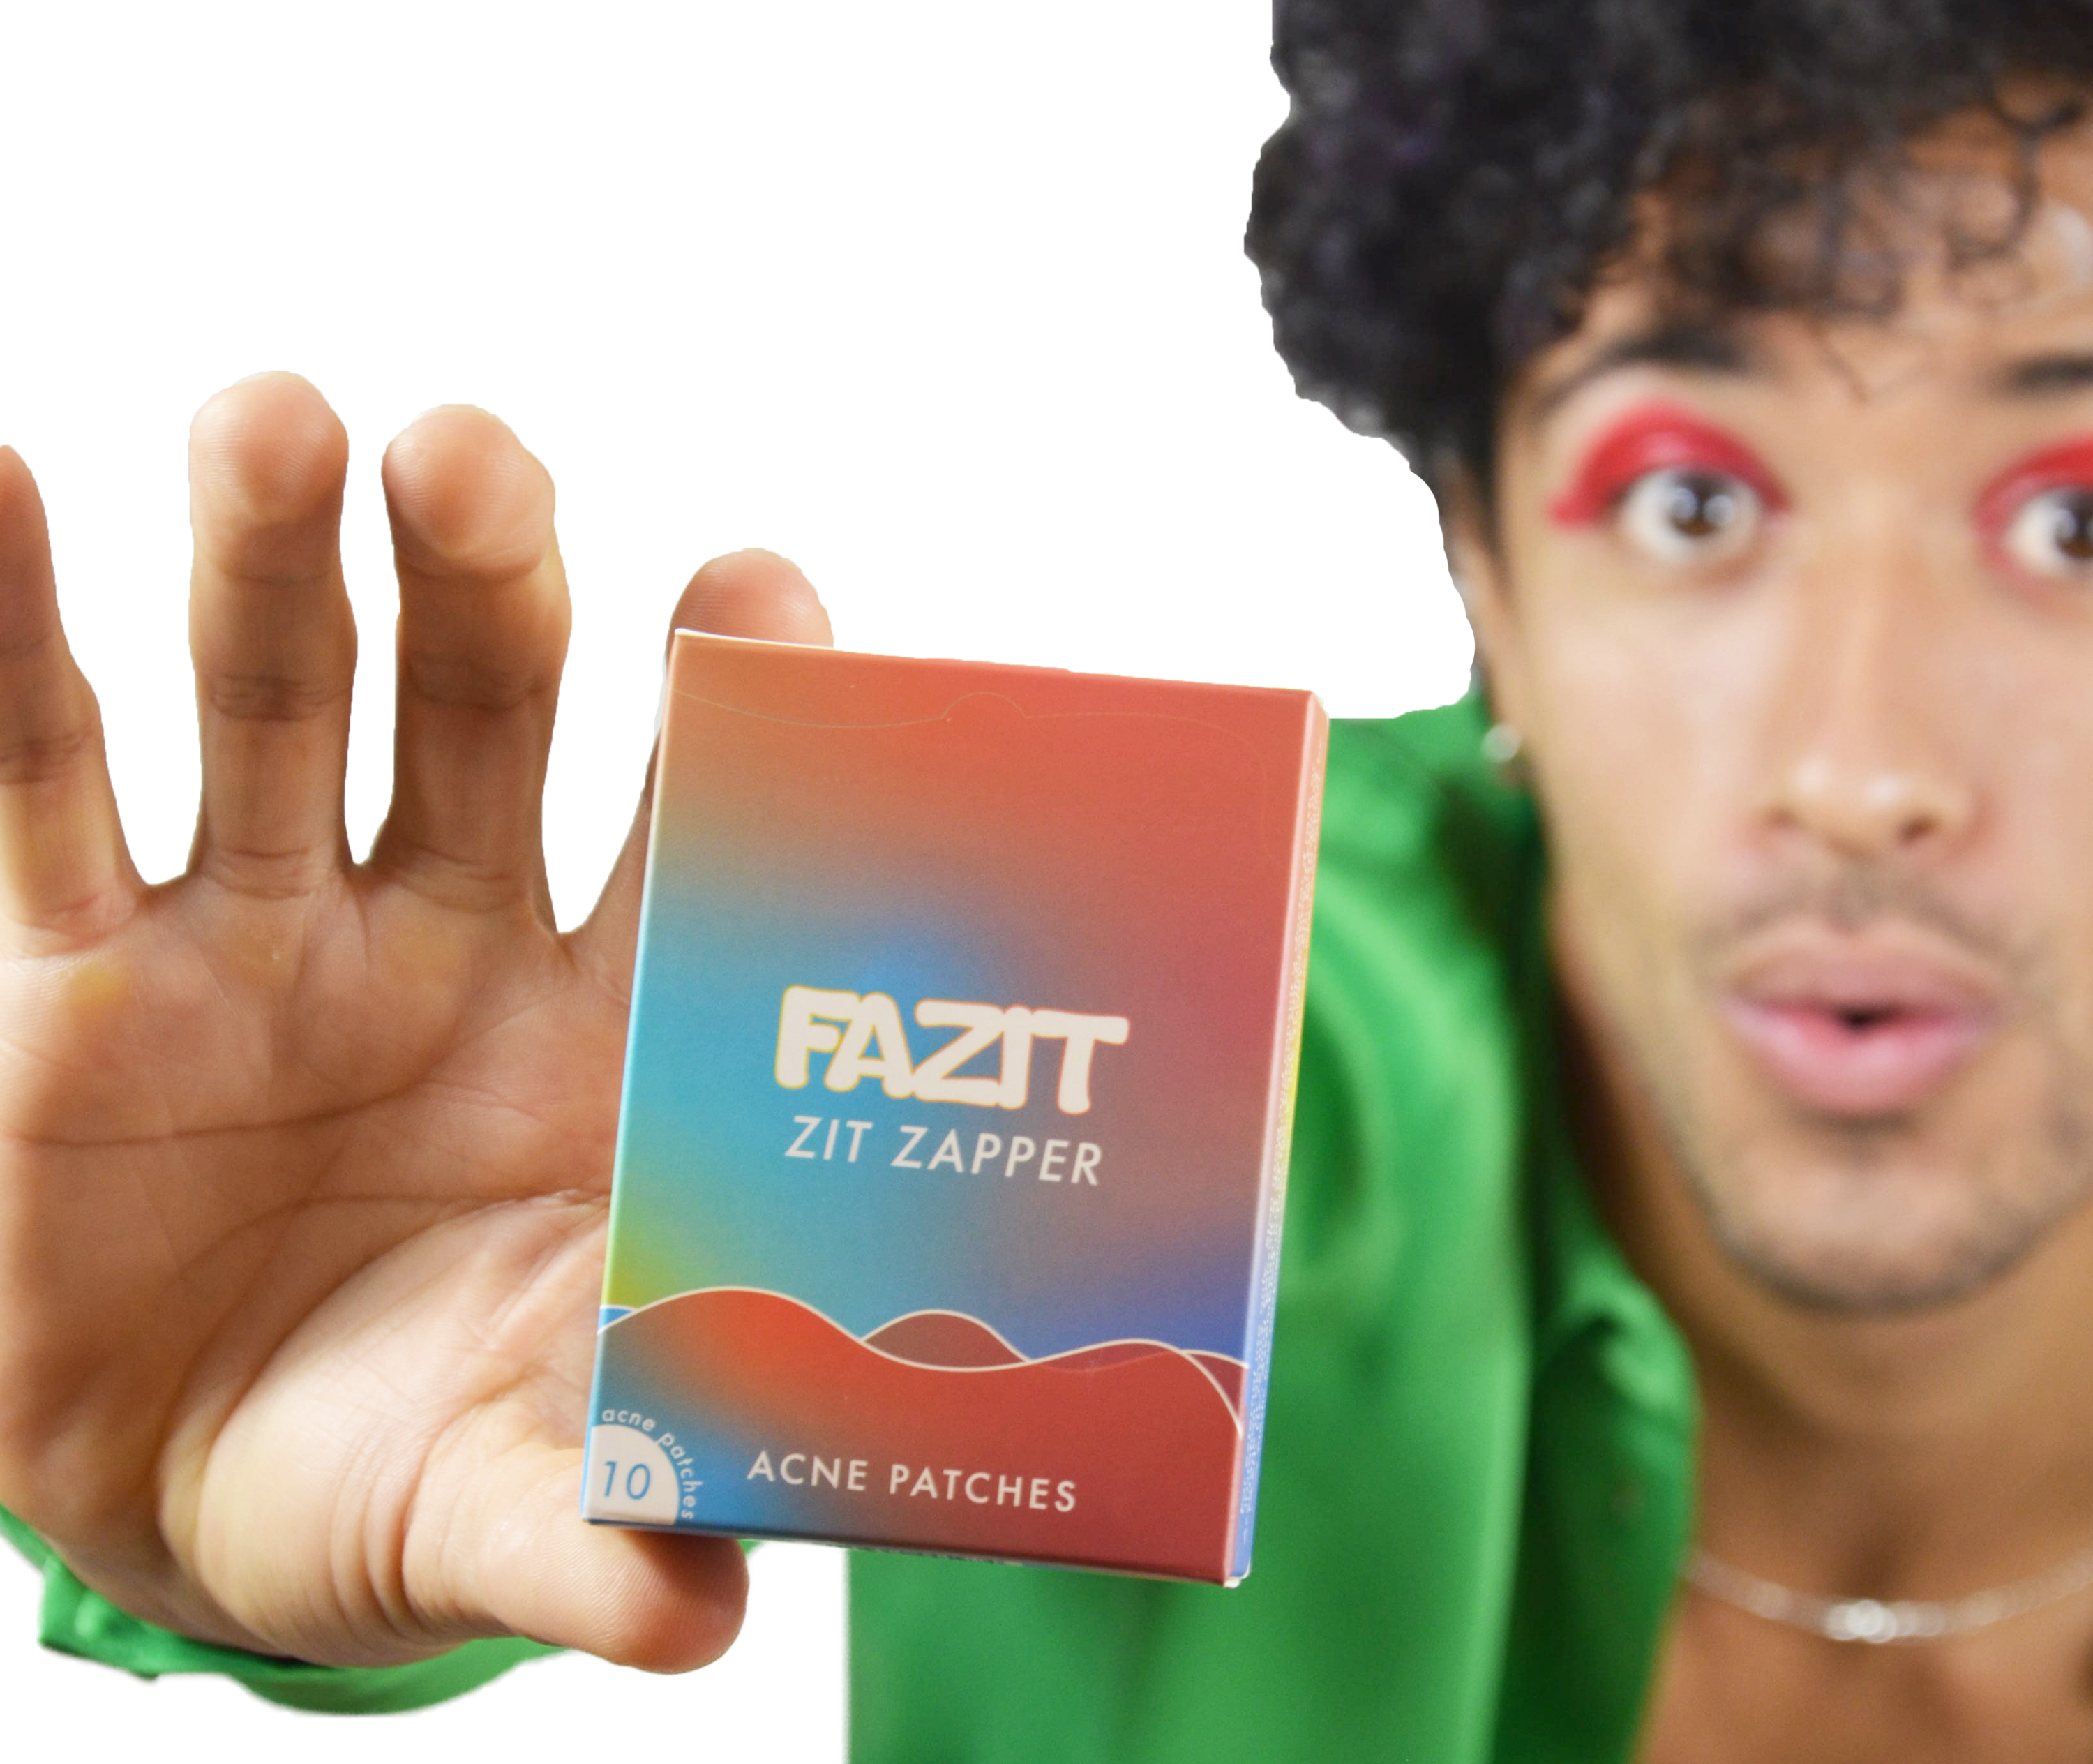 image of someone holding the zit zapper box